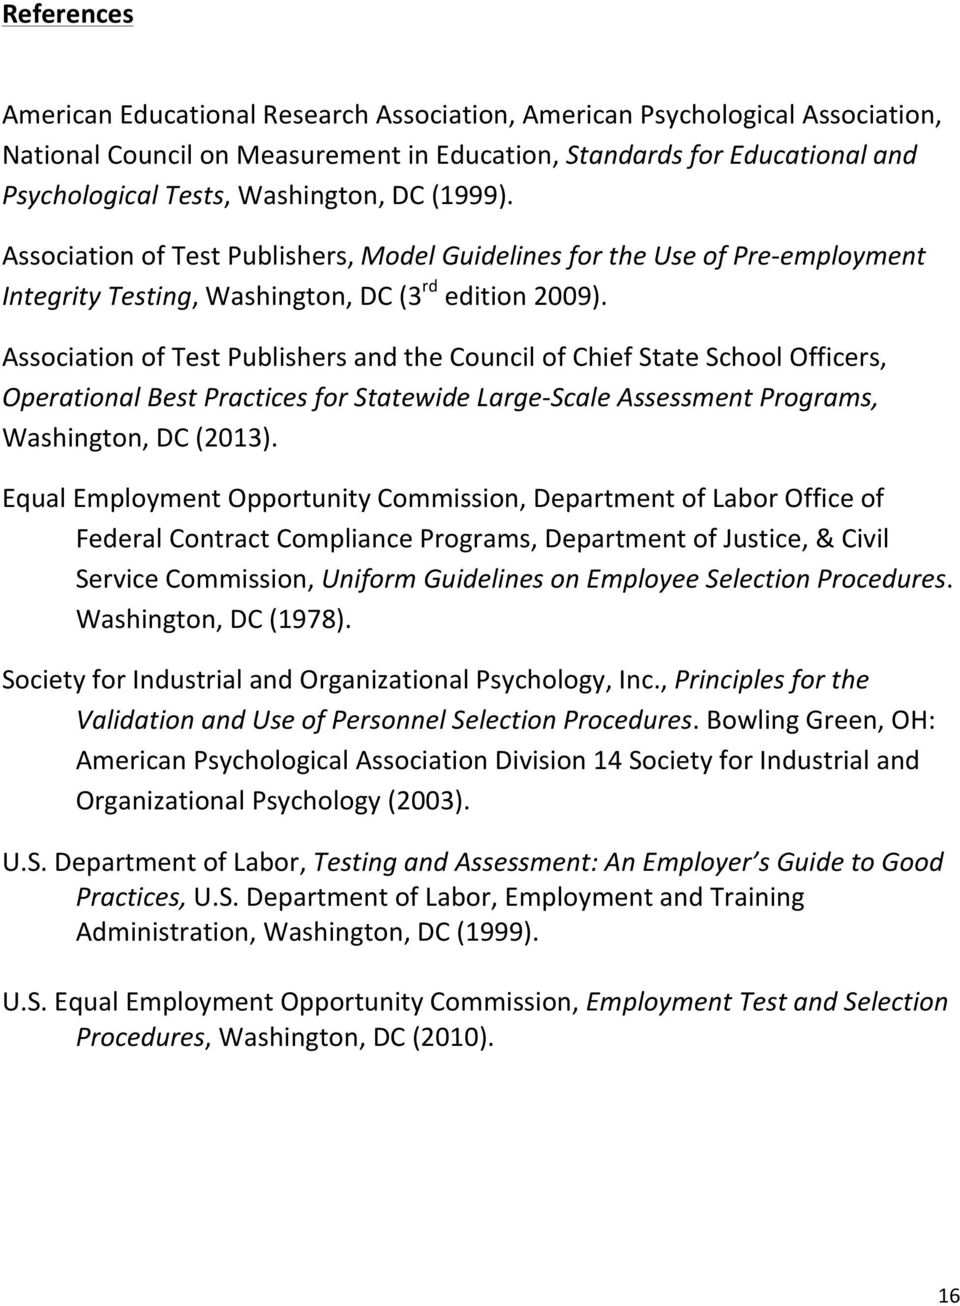 Association of Test Publishers and the Council of Chief State School Officers, Operational Best Practices for Statewide Large- Scale Assessment Programs, Washington, DC (2013).